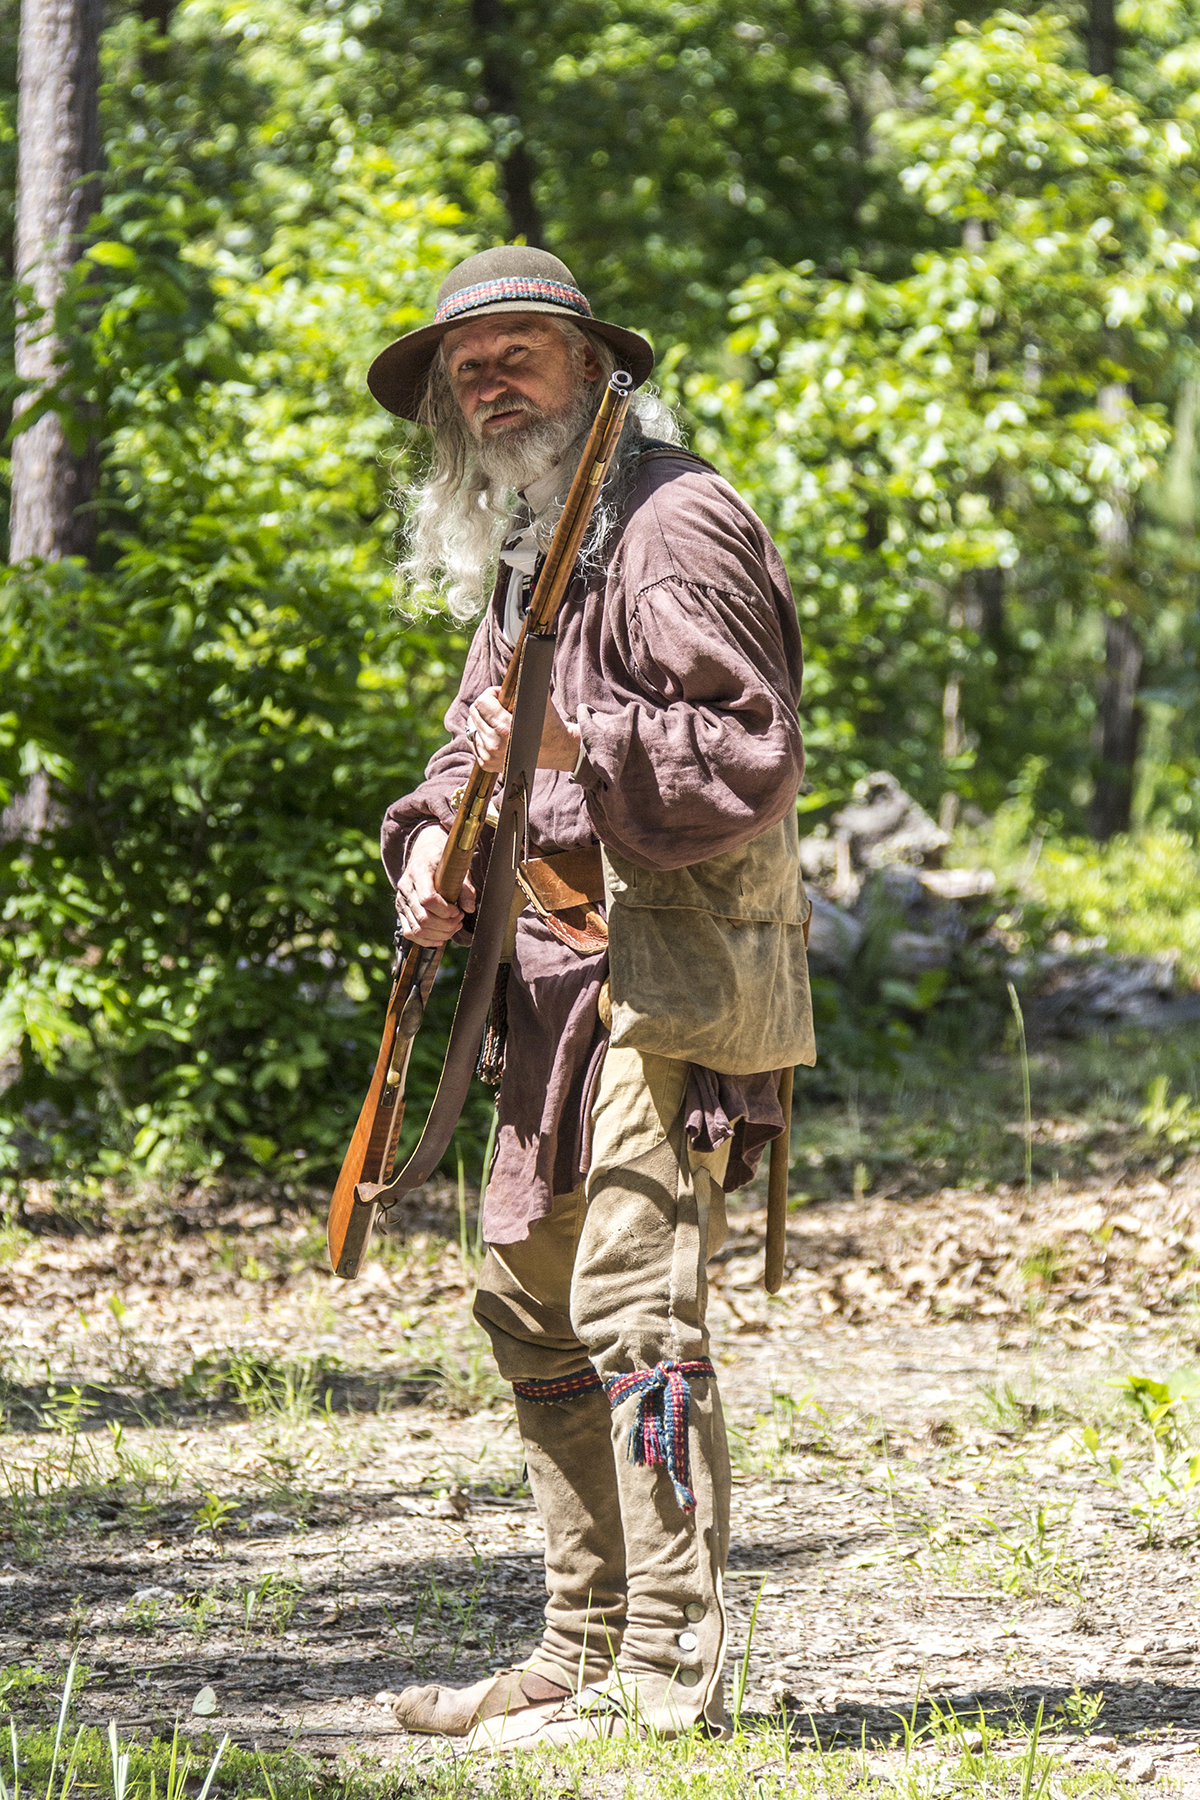 A patriot rifleman stands ready to fire his weapon.